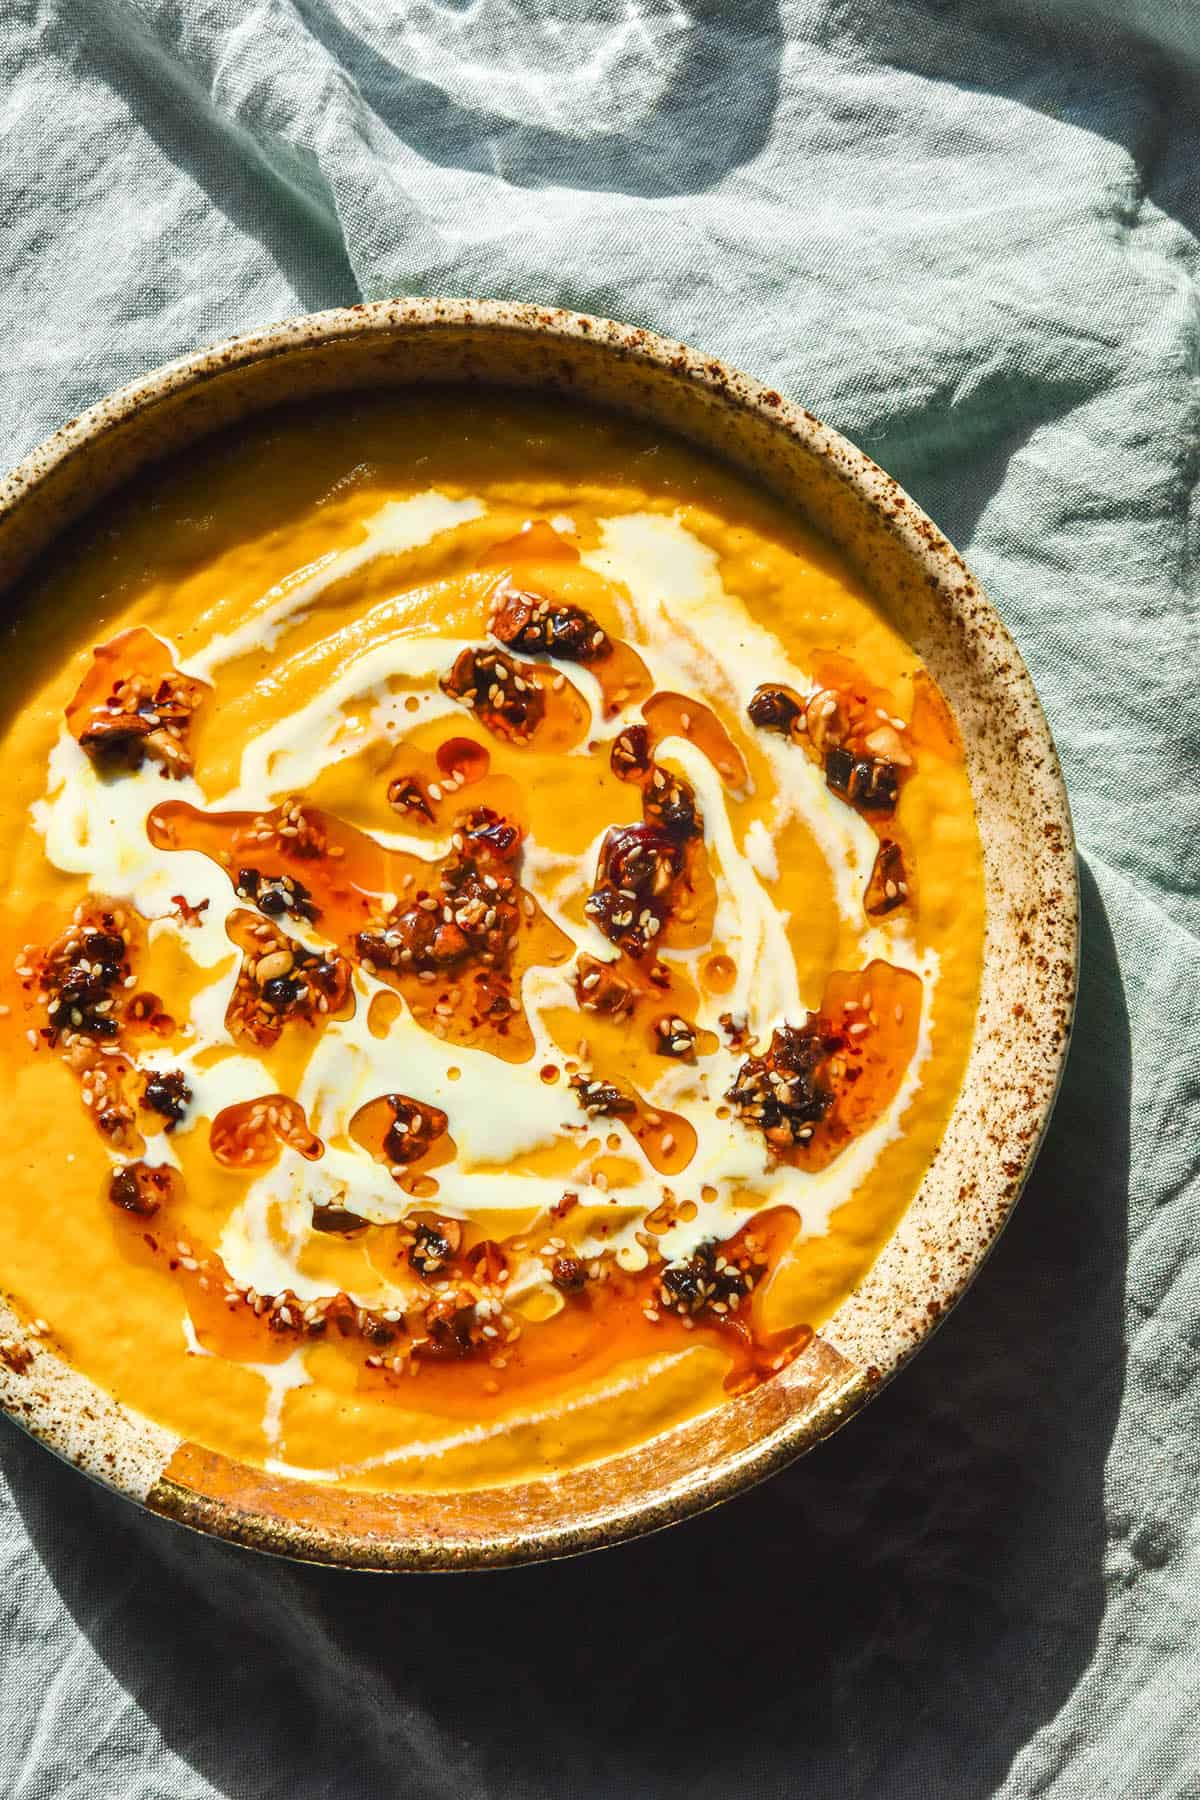 An aerial image of a speckled ceramic bowl filled with low FODMAP carrot soup. The carrot soup is topped with chilli crisp, cream and tofu crumbles and sits atop a pale green linen tablecloth.